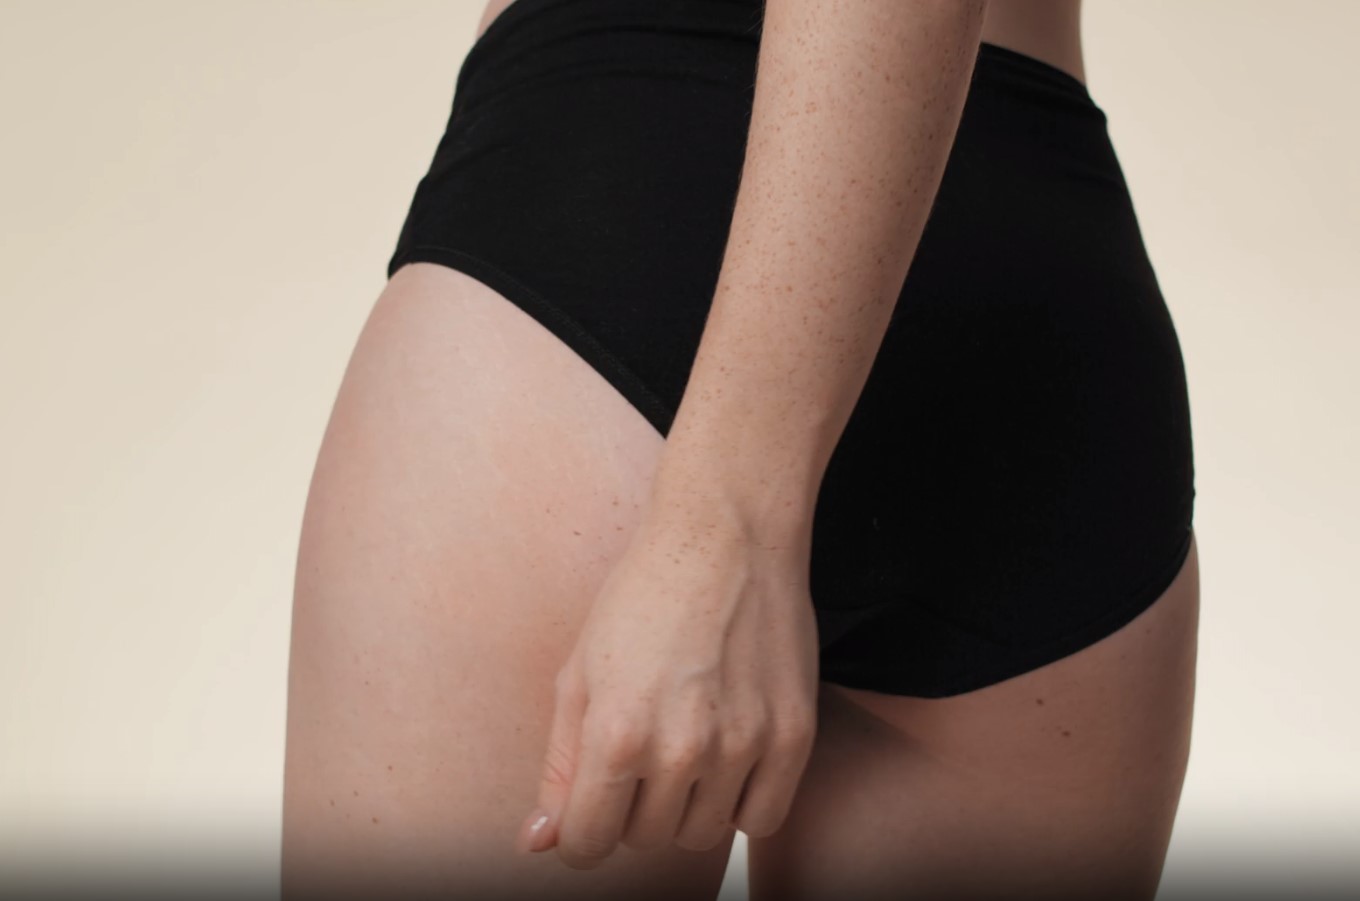 How To Get Rid Of Hip Dips - Contour Your Hips